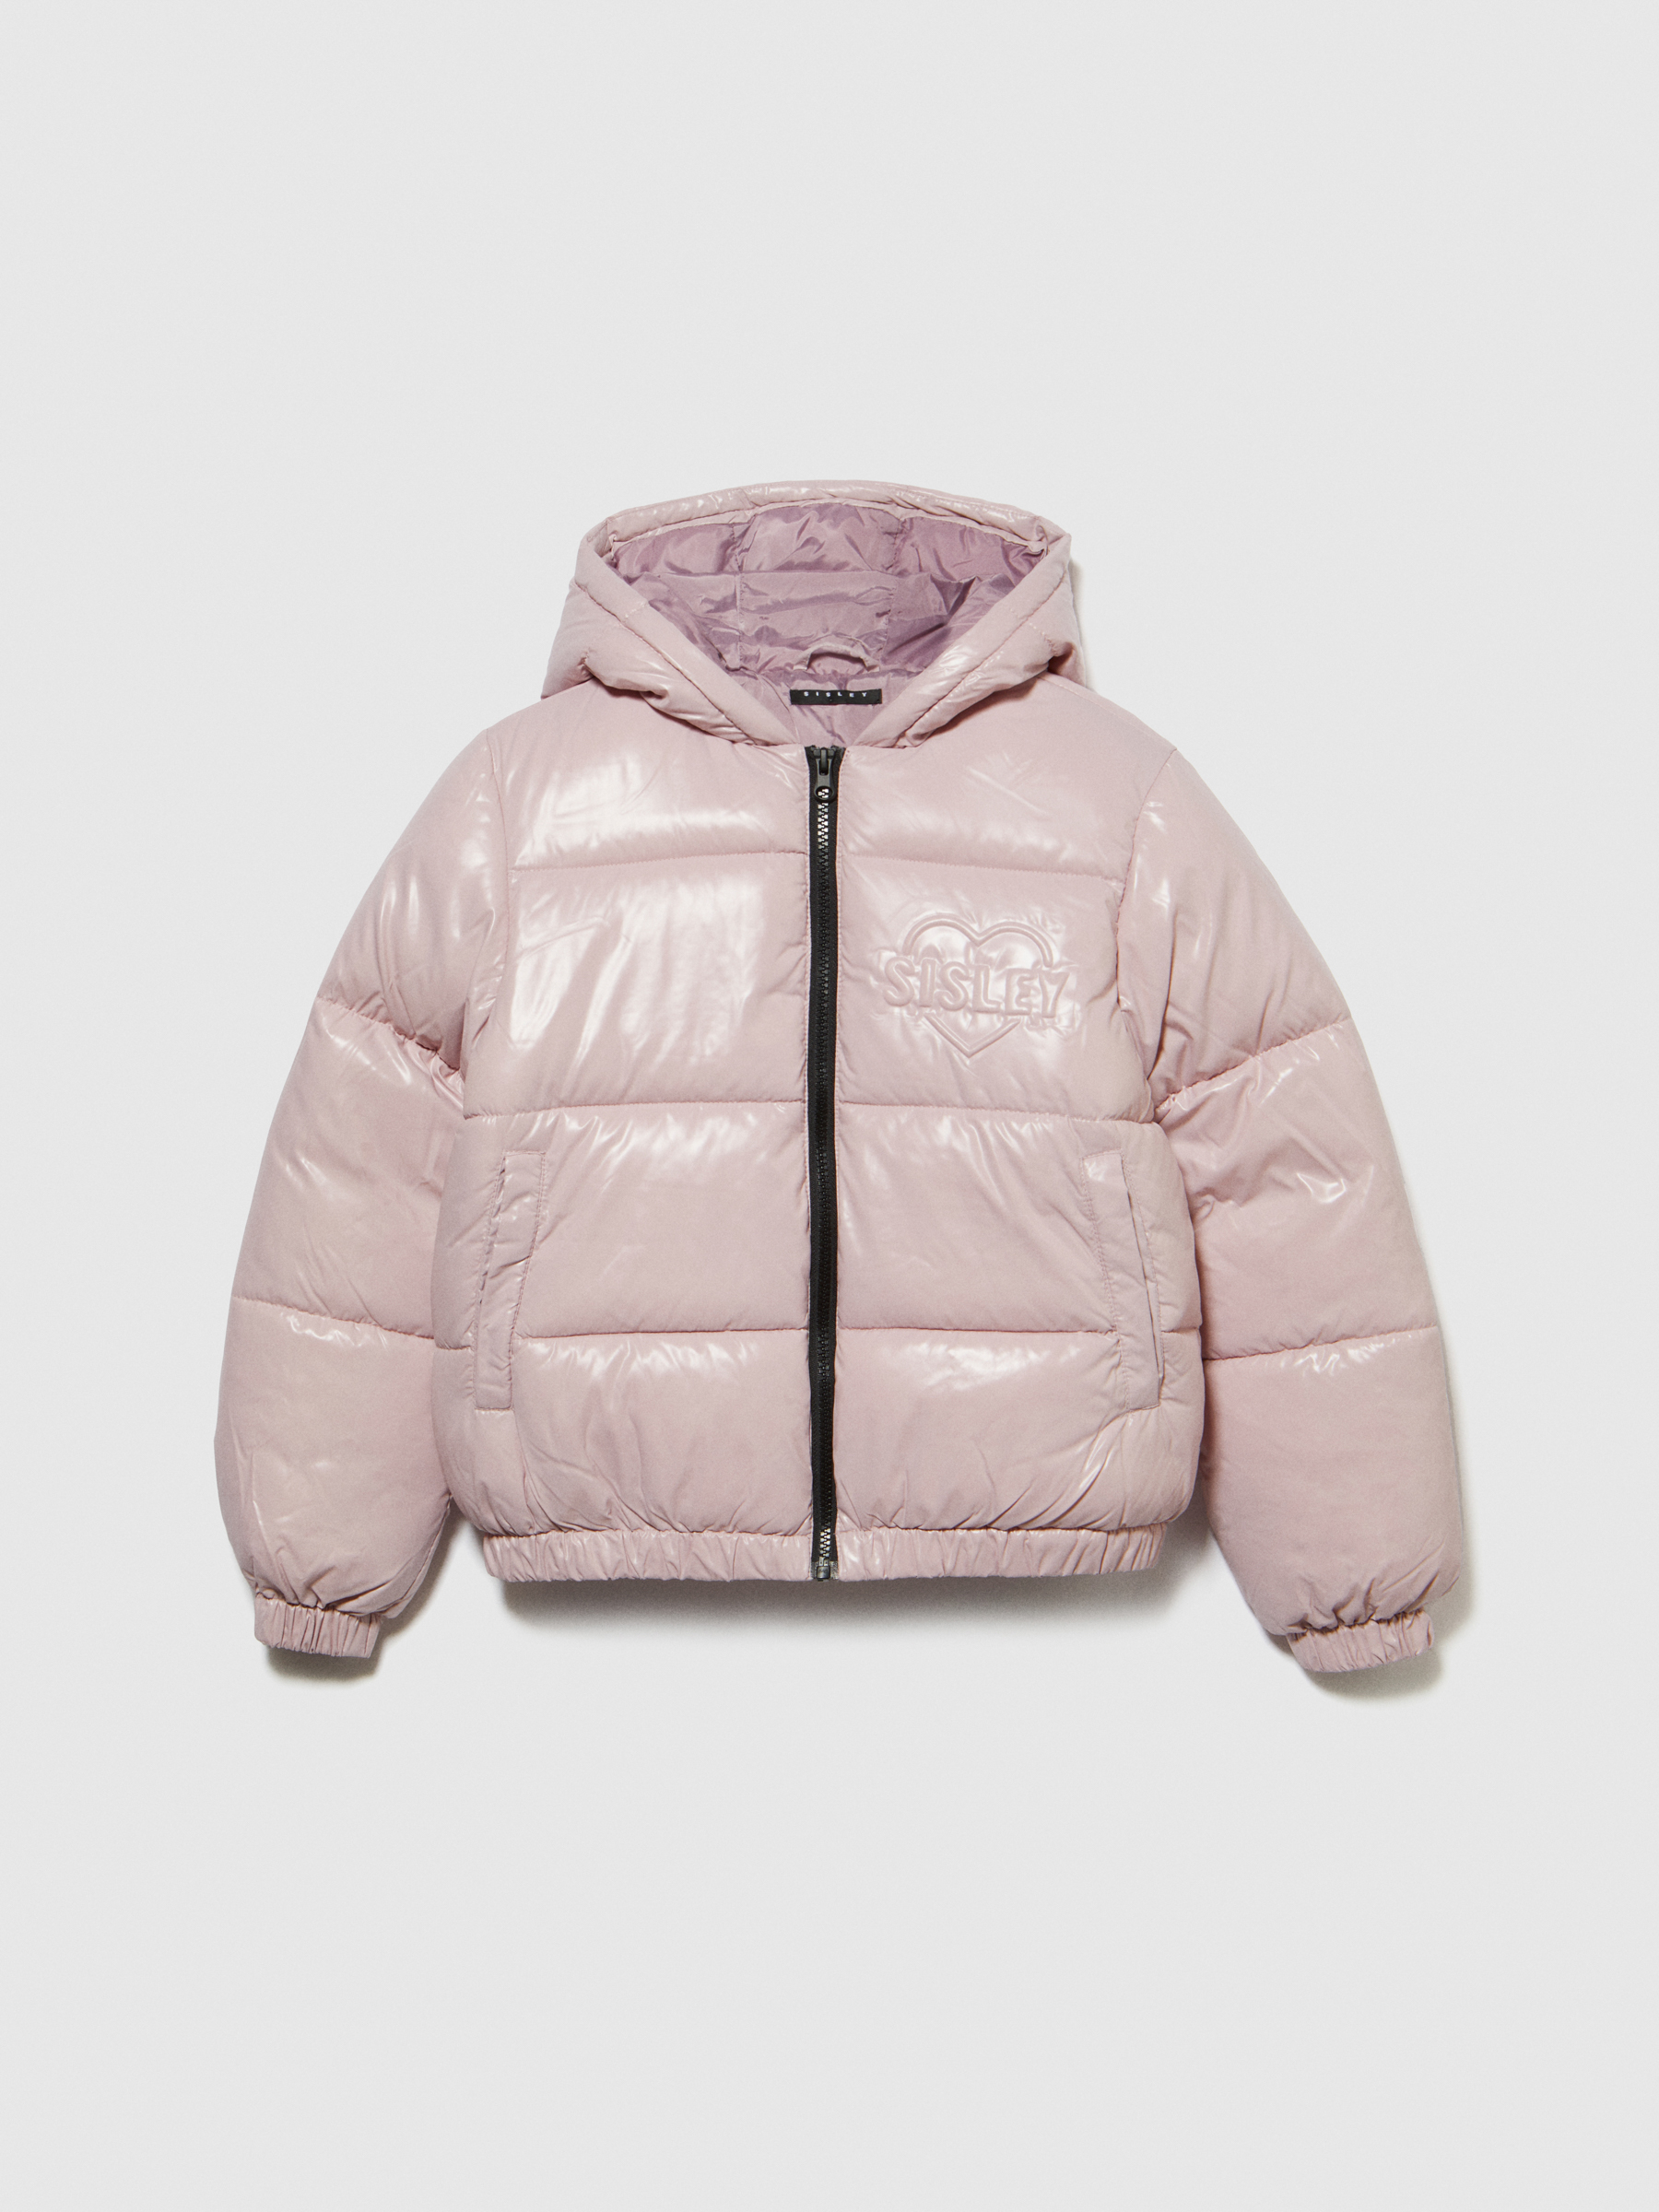 Sisley Young - Padded Jacket With Embossed Print, Woman, Pastel Pink, Size: L